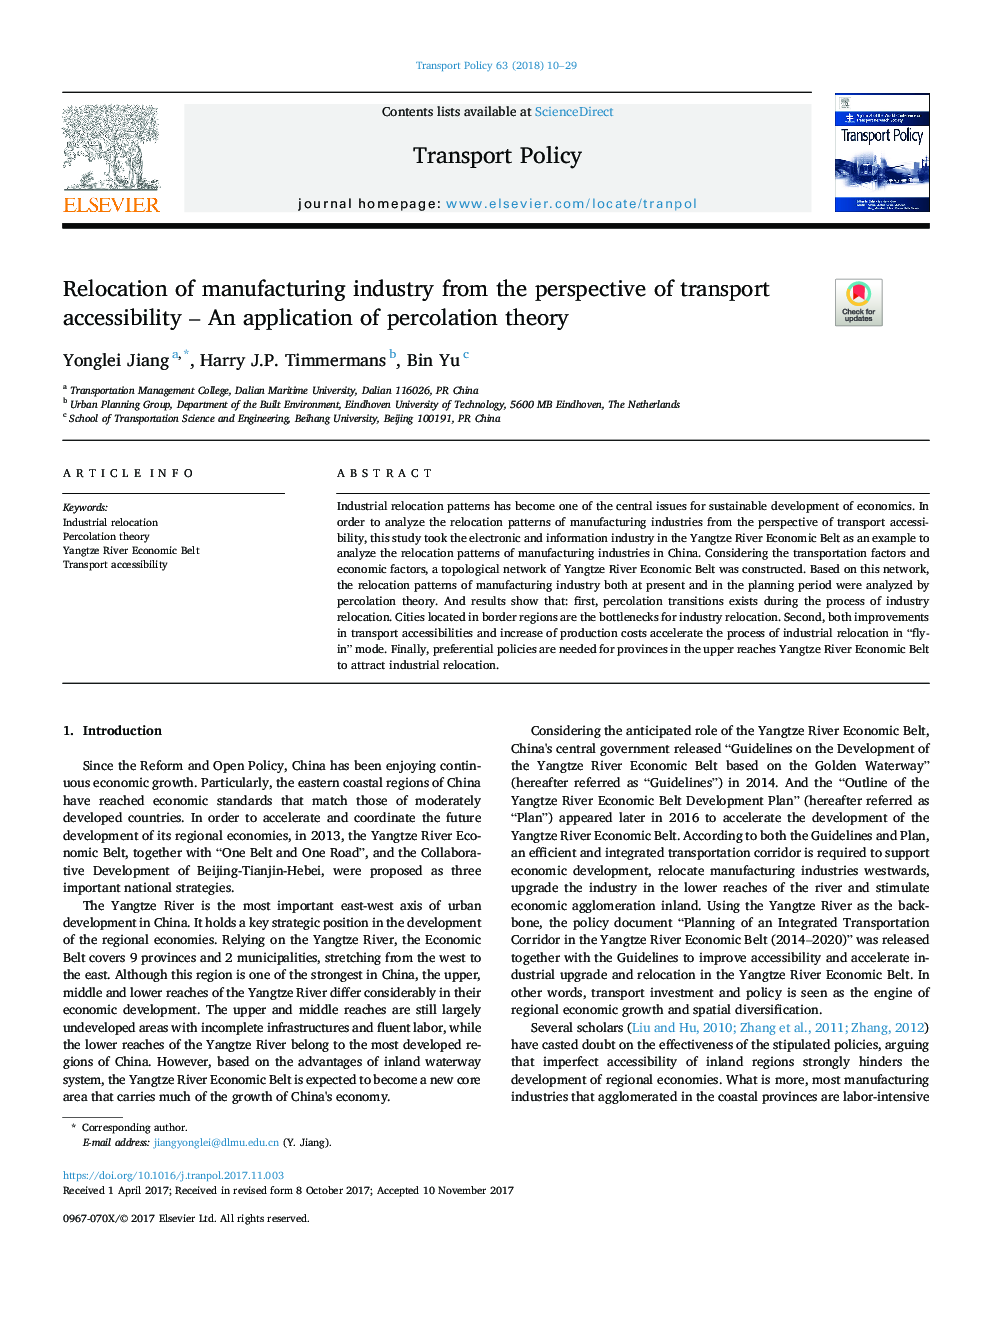 Relocation of manufacturing industry from the perspective of transport accessibility - An application of percolation theory